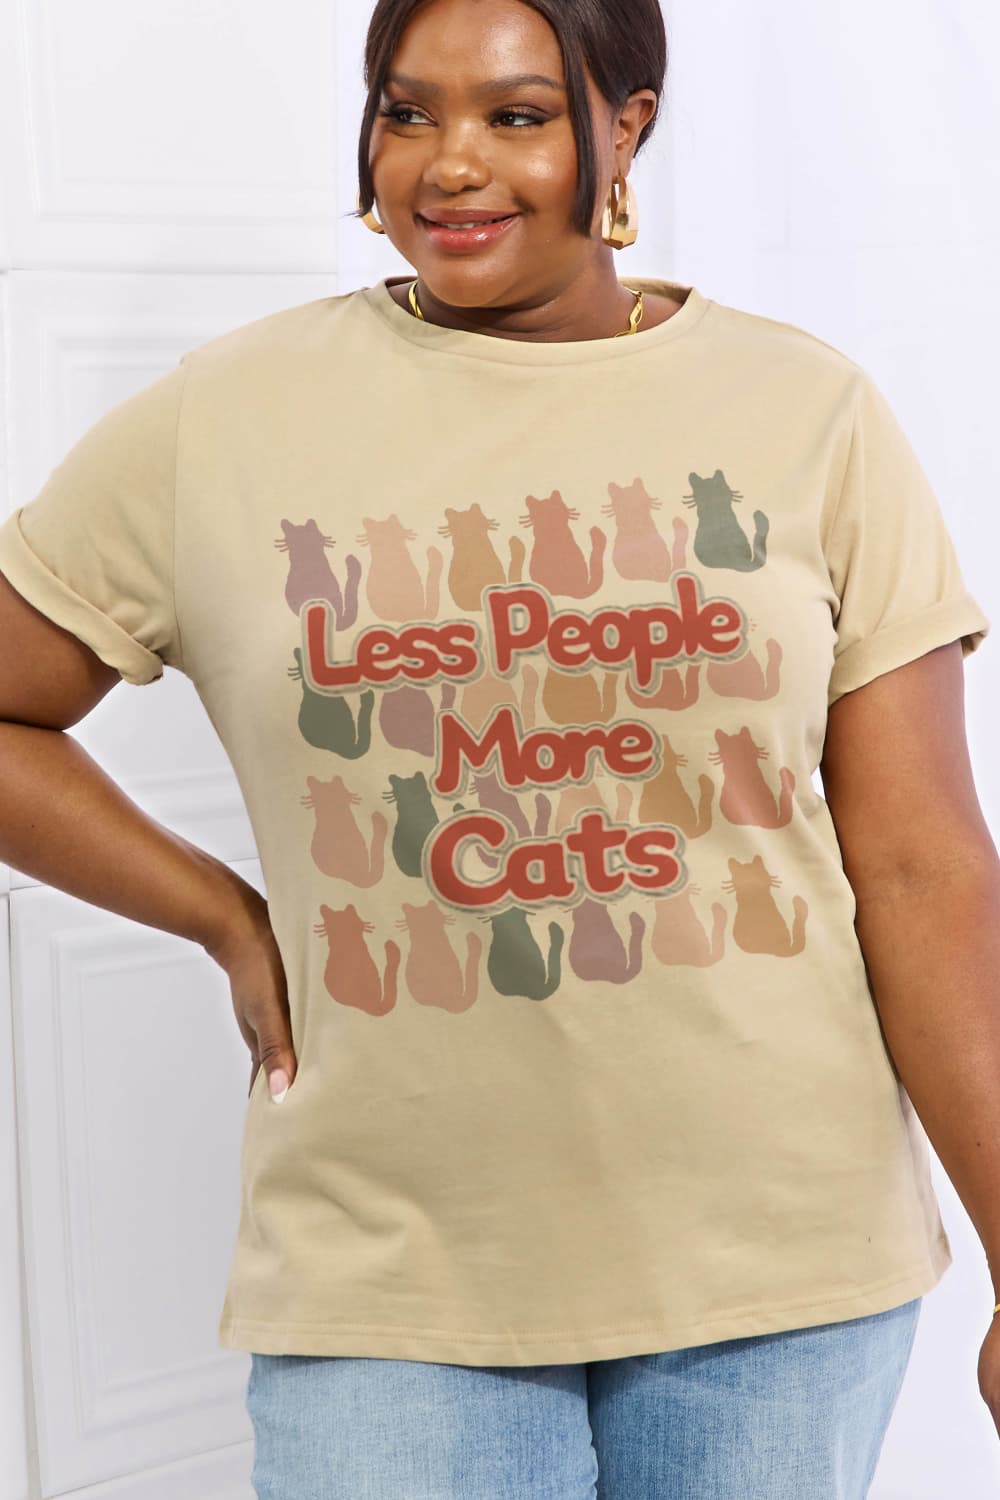 Simply Love Full Size Halloween LESS PEOPLE MORE CATS Graphic Cotton Tee